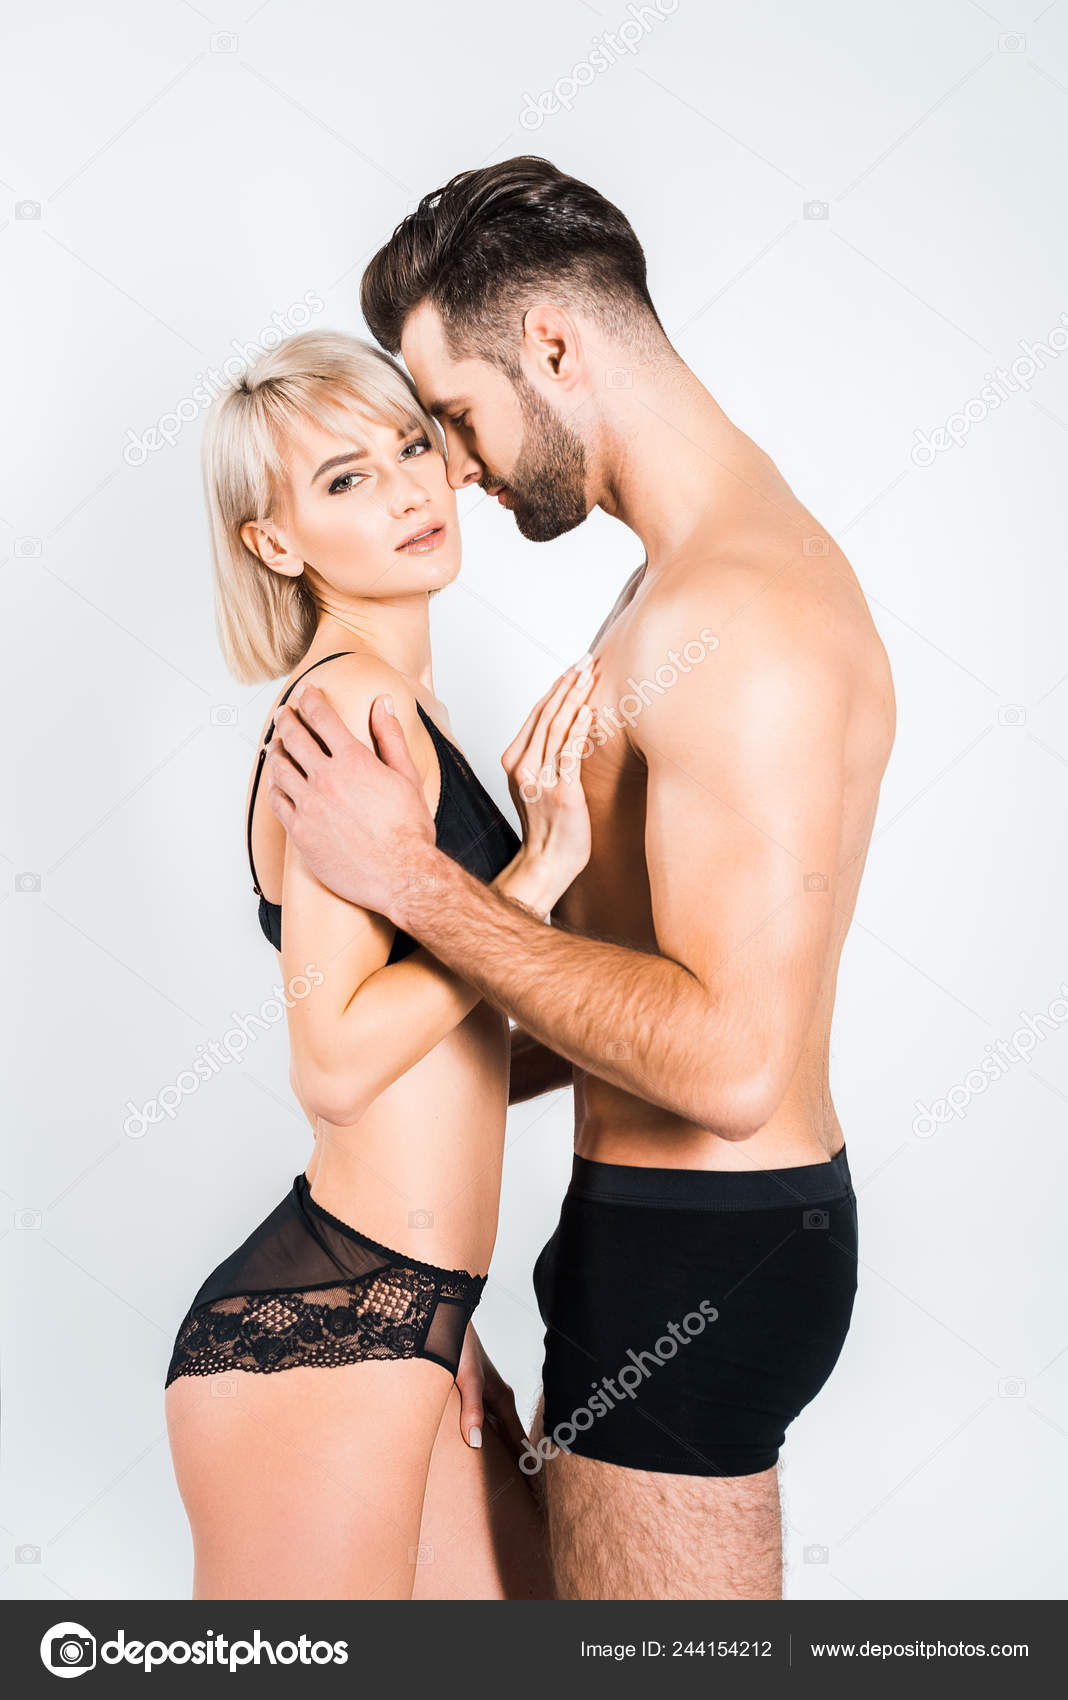 Intimate Couple Goals Underwear Bubbly Printed Design Sculpting Lovers Match 